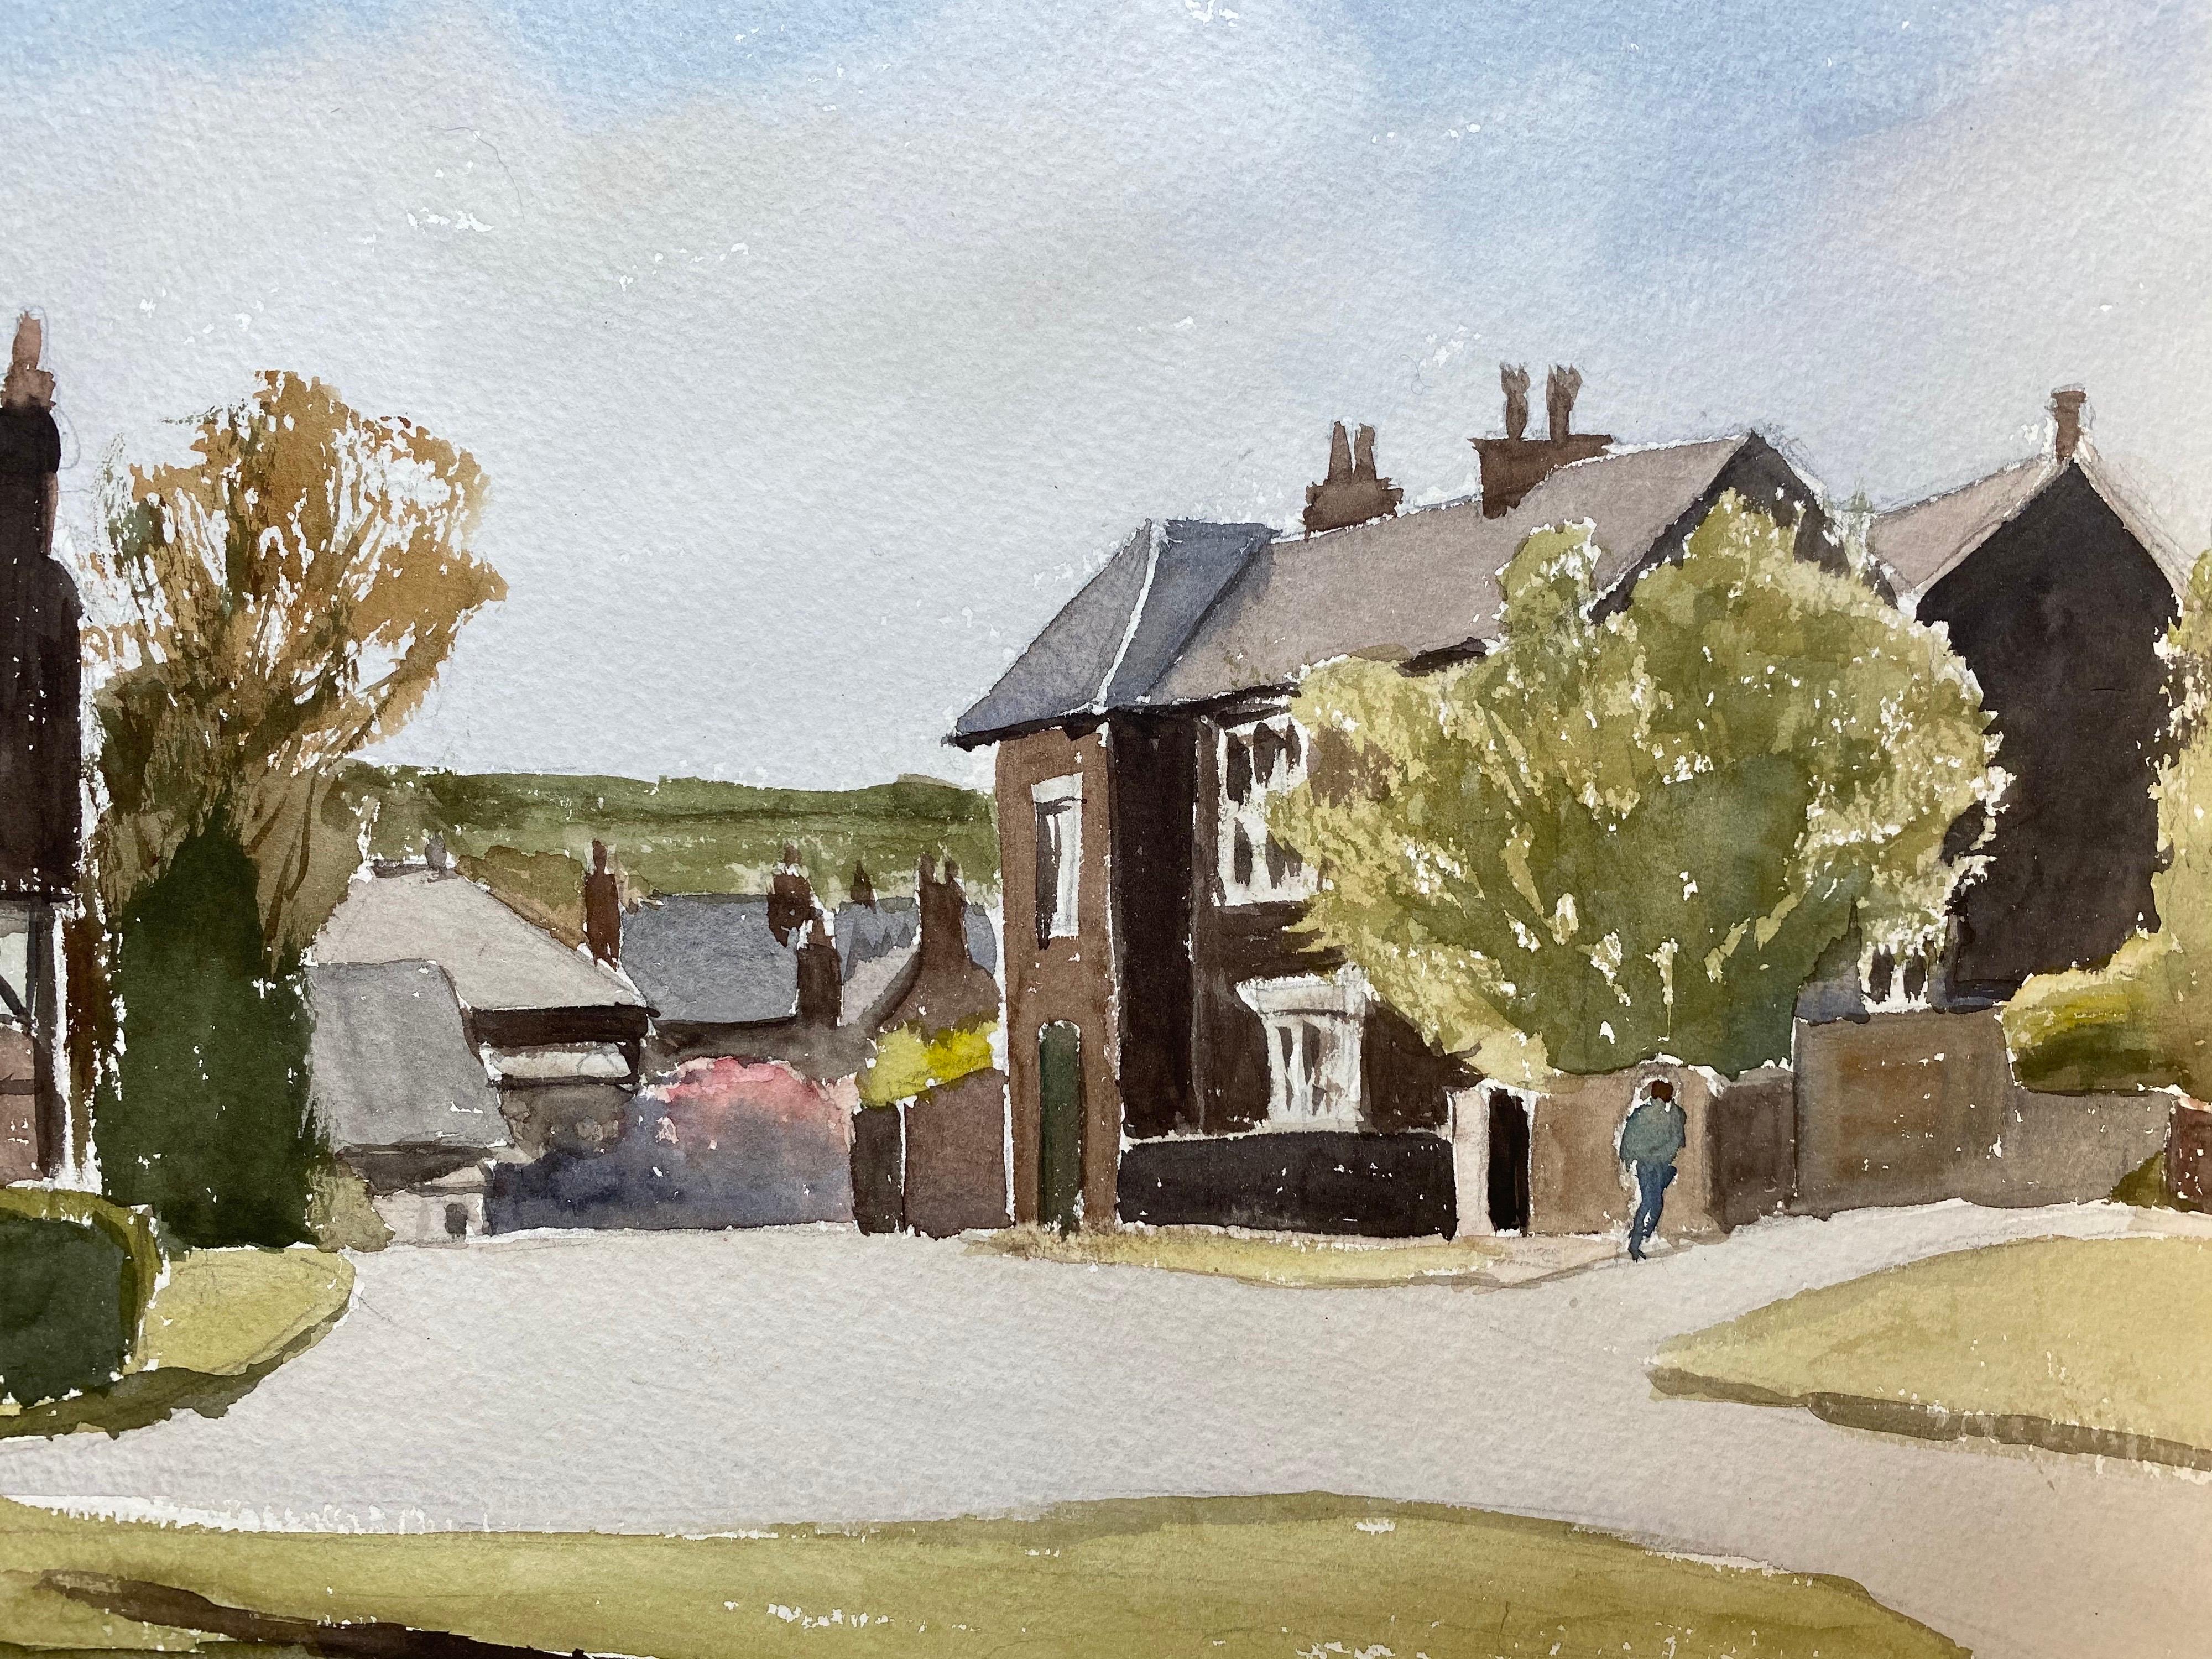  English Rural Country Village, signed original British watercolour painting - Painting by Ronald Birch